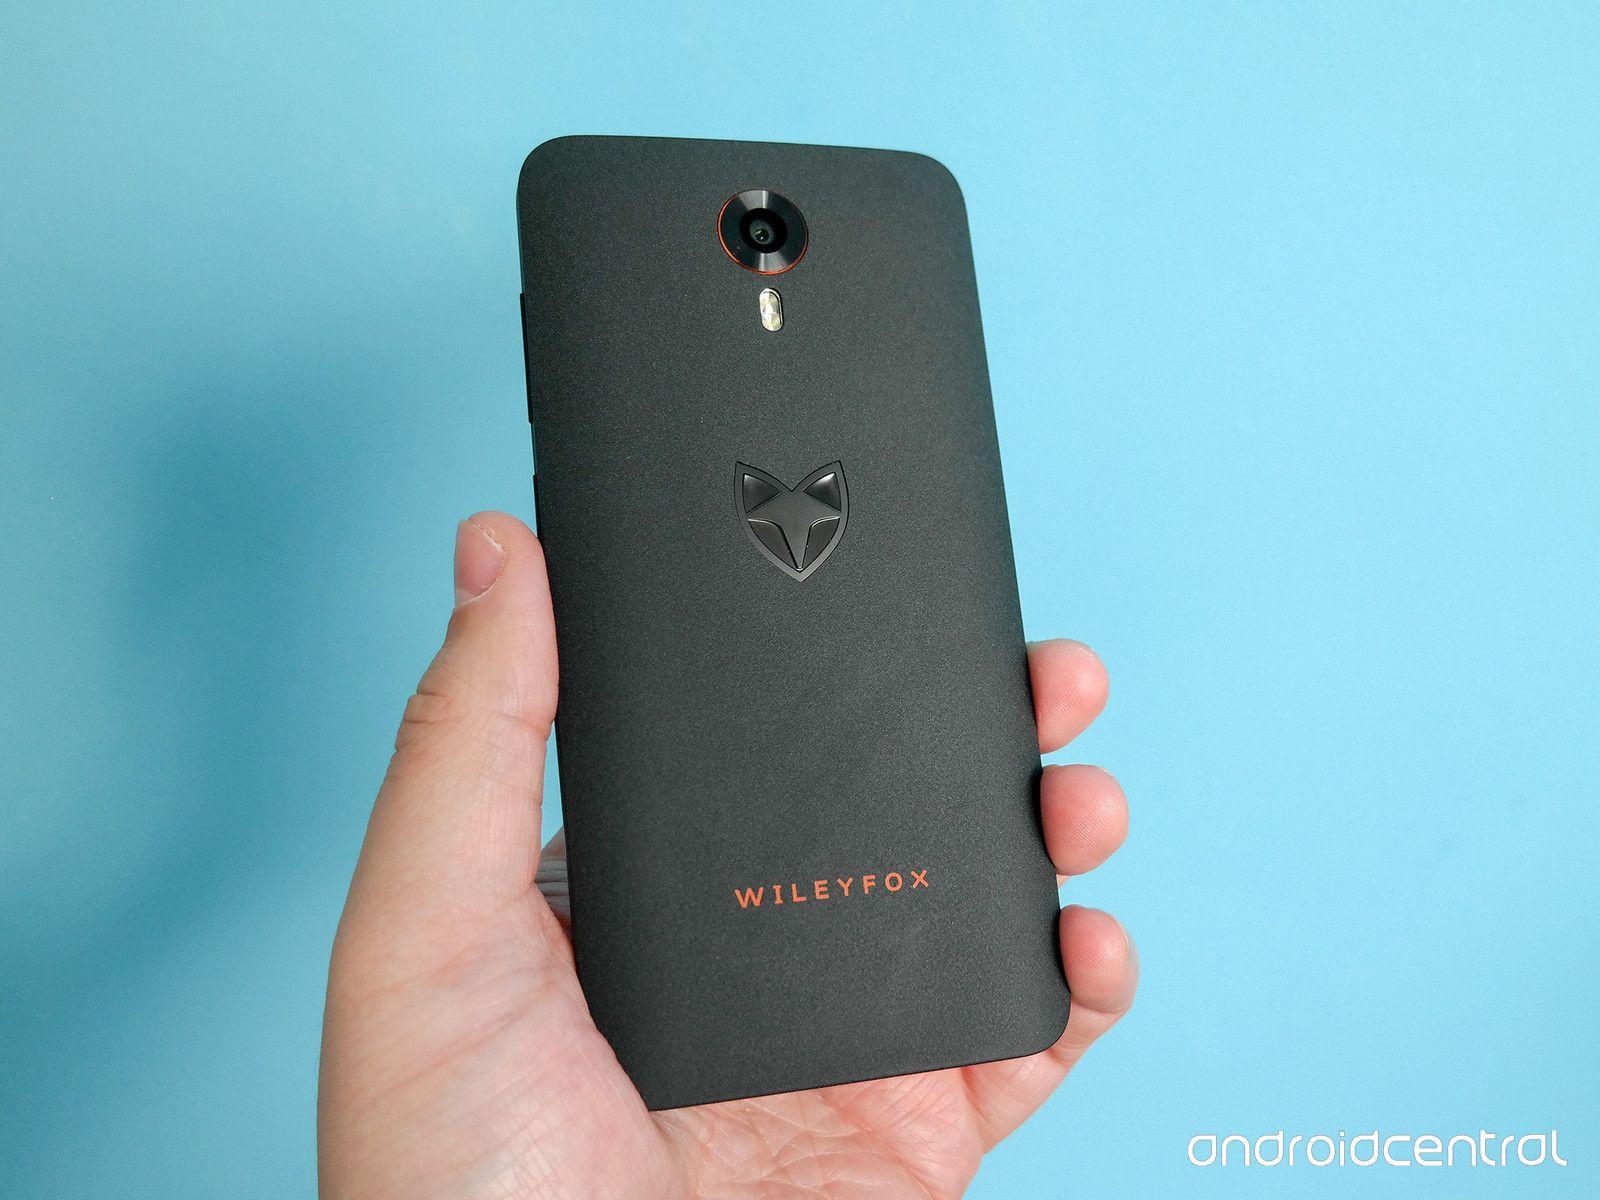 Fox Phone Logo - Wileyfox Swift review | Android Central